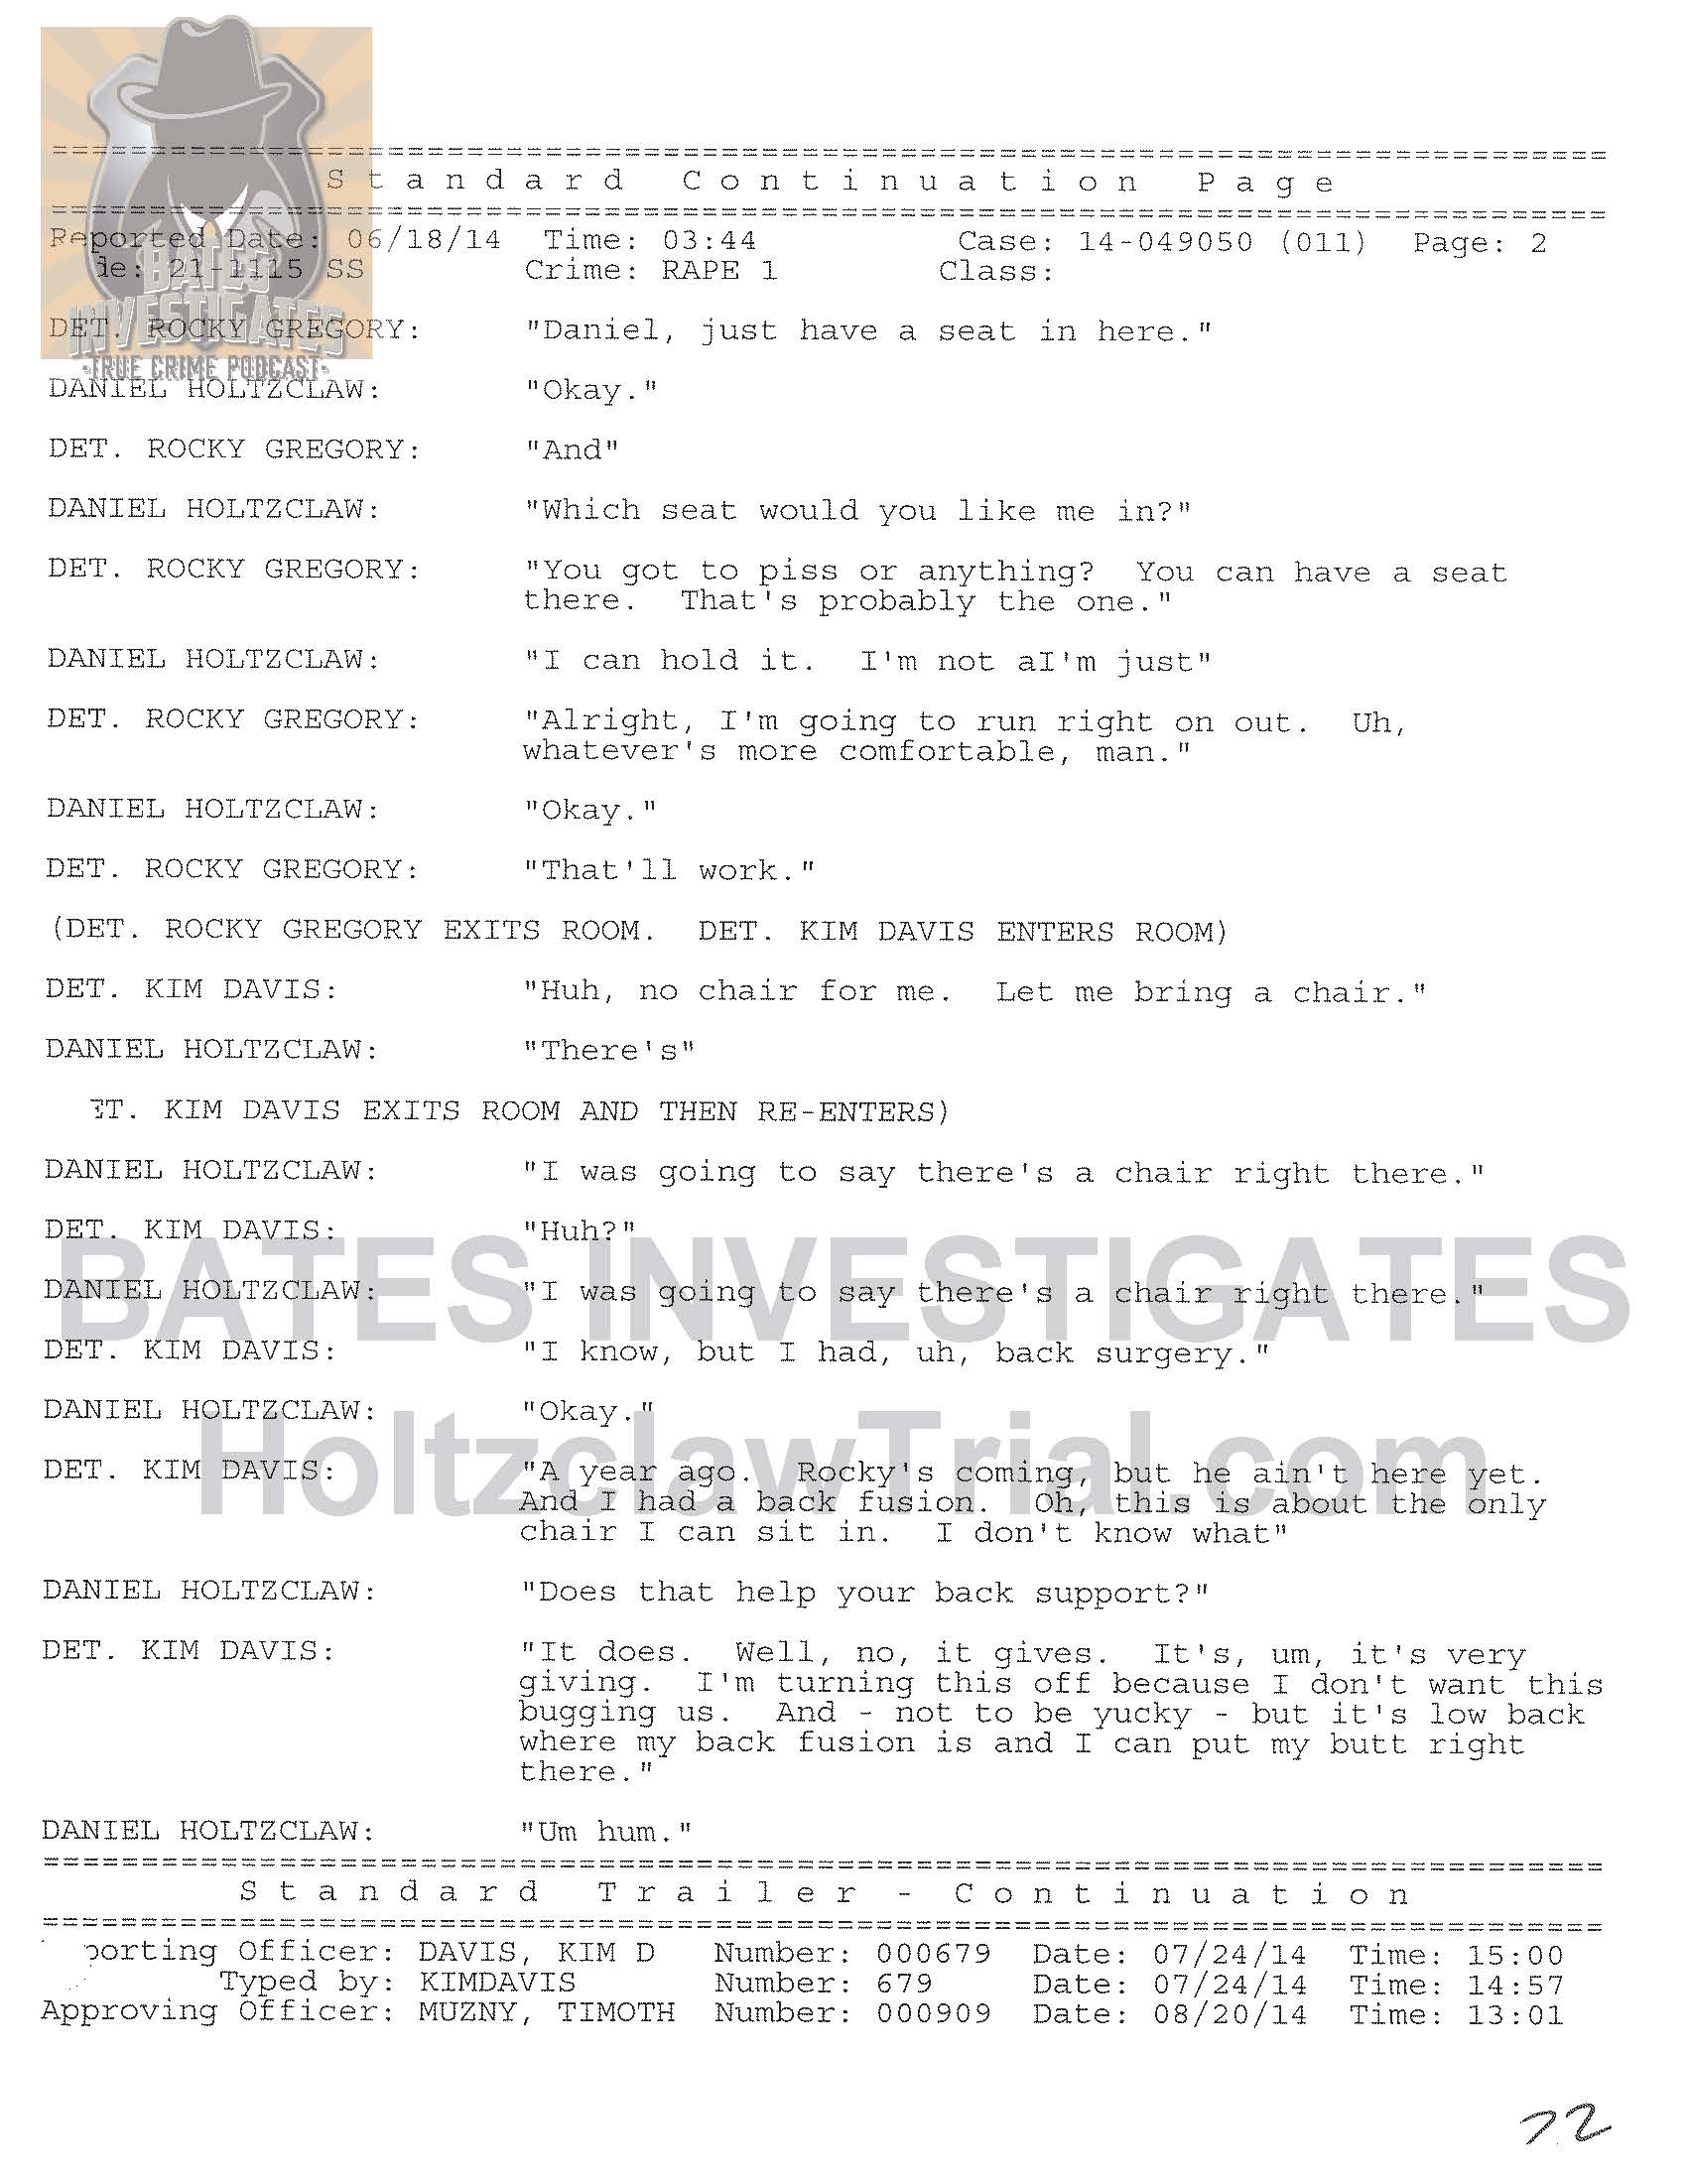 Holtzclaw Interrogation Transcript - Ep02 Redacted_Page_02.jpg